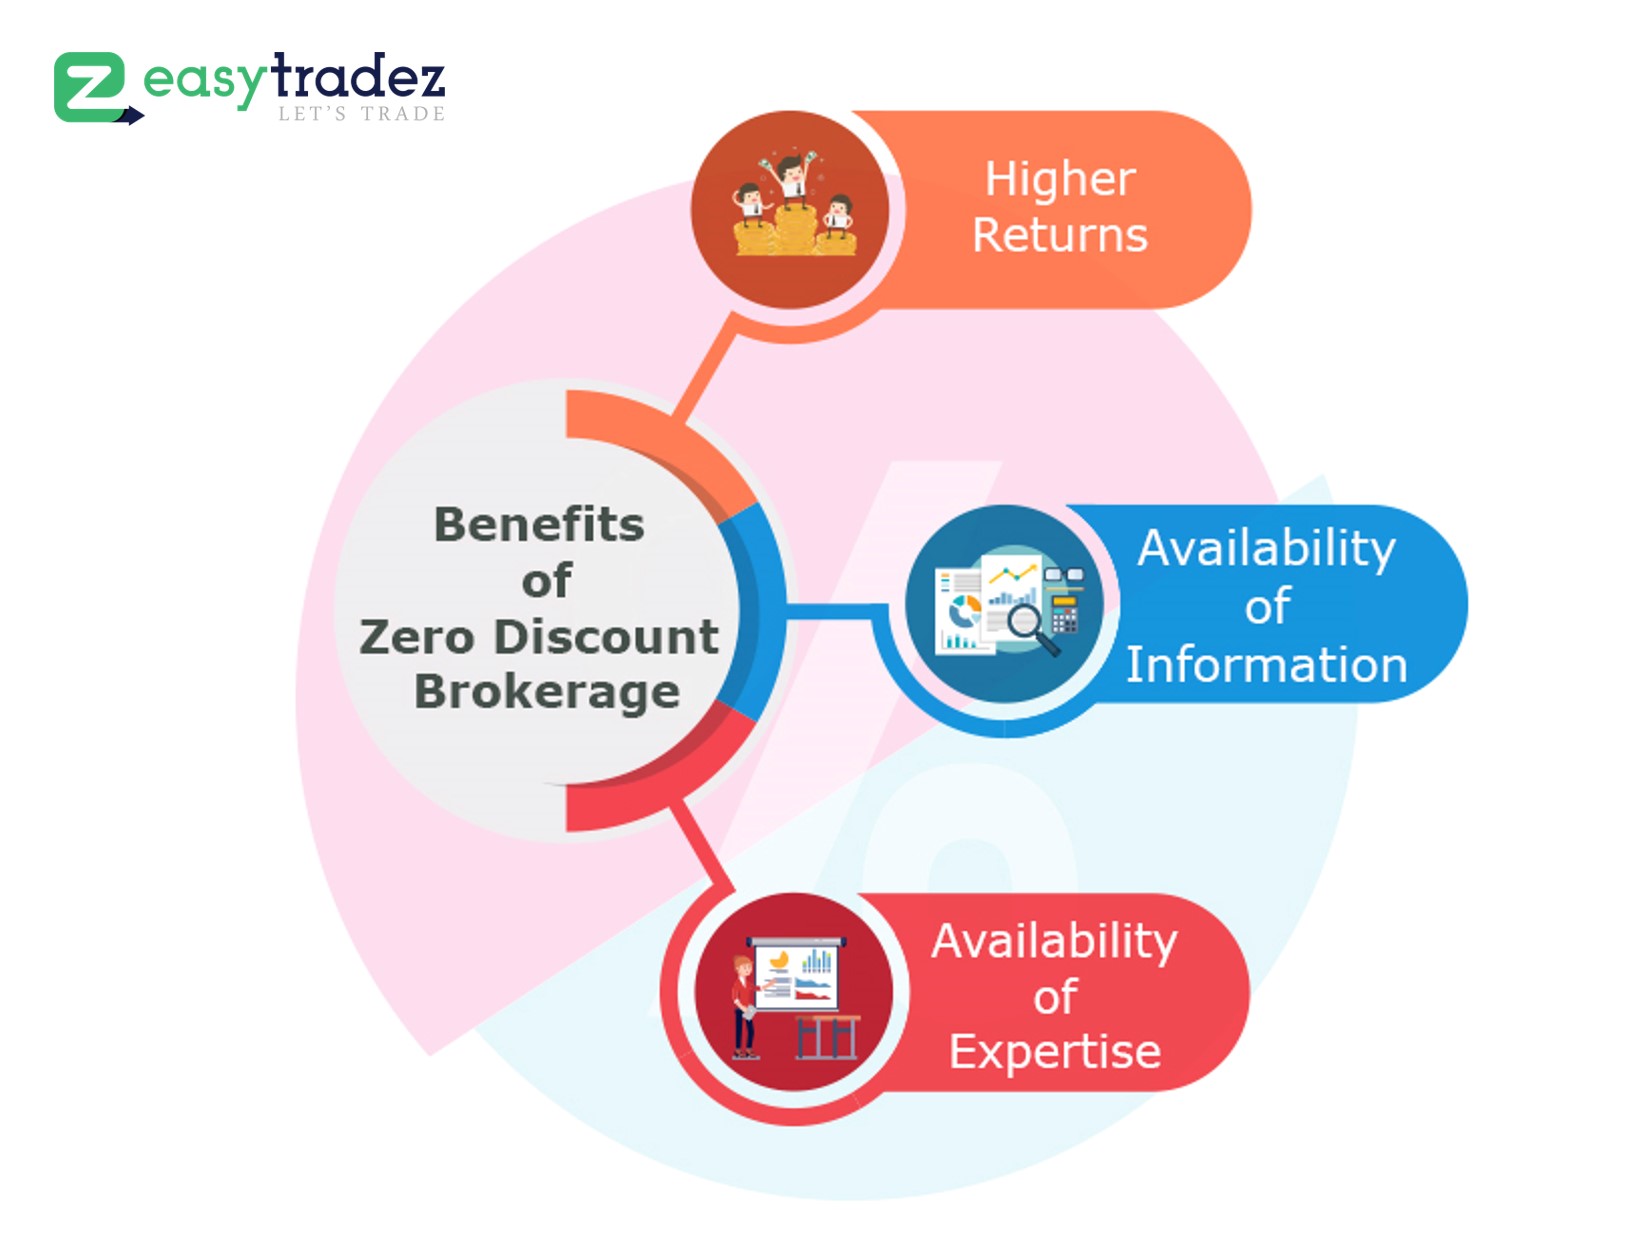 How Can You Benefit from Zero Brokerage in India?